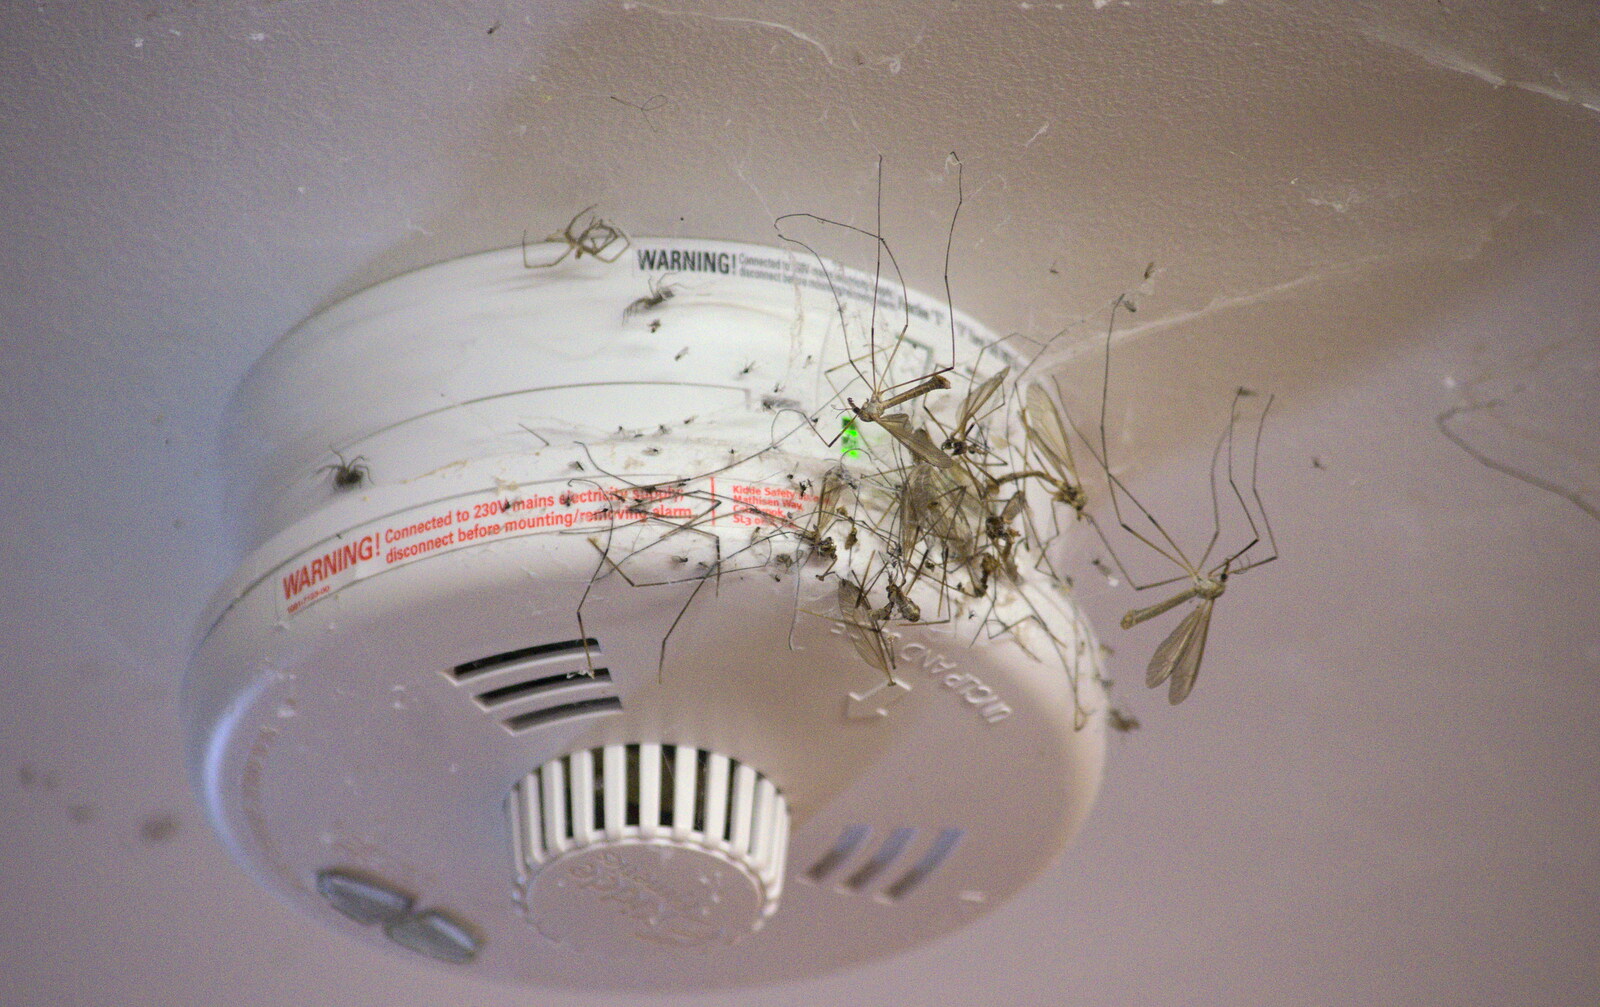 A load of dead insects encrusted on a smoke alarm from A Saturday in Town, Diss, Norfolk - 8th November 2014